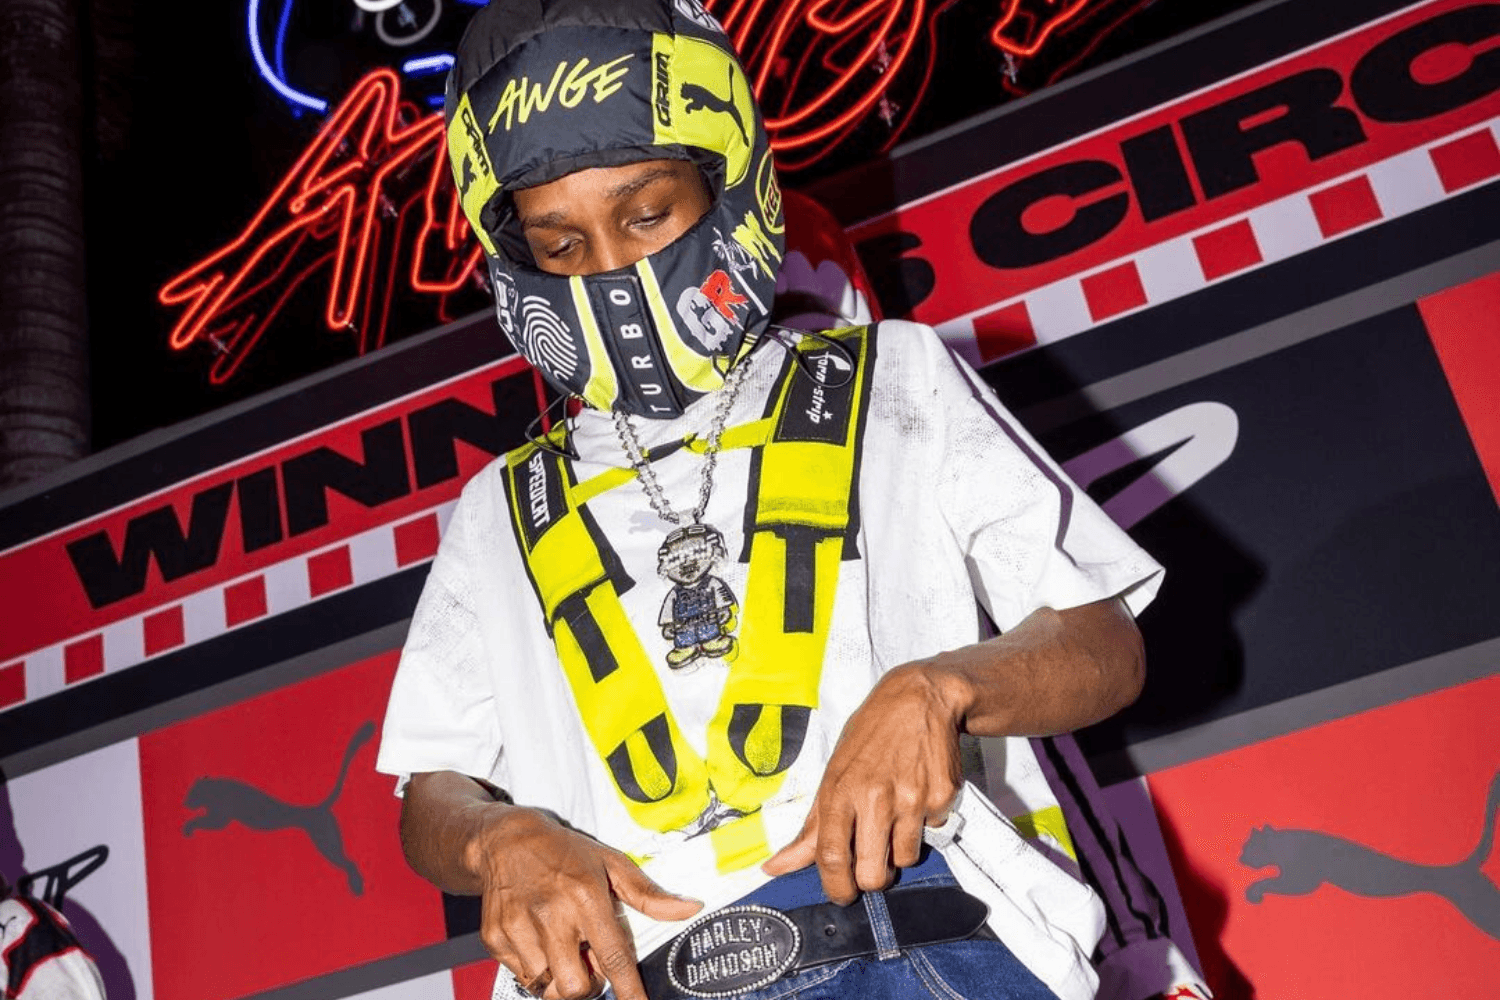 A$AP Rocky debuted his PUMA collection and sneakers during F1 Miami